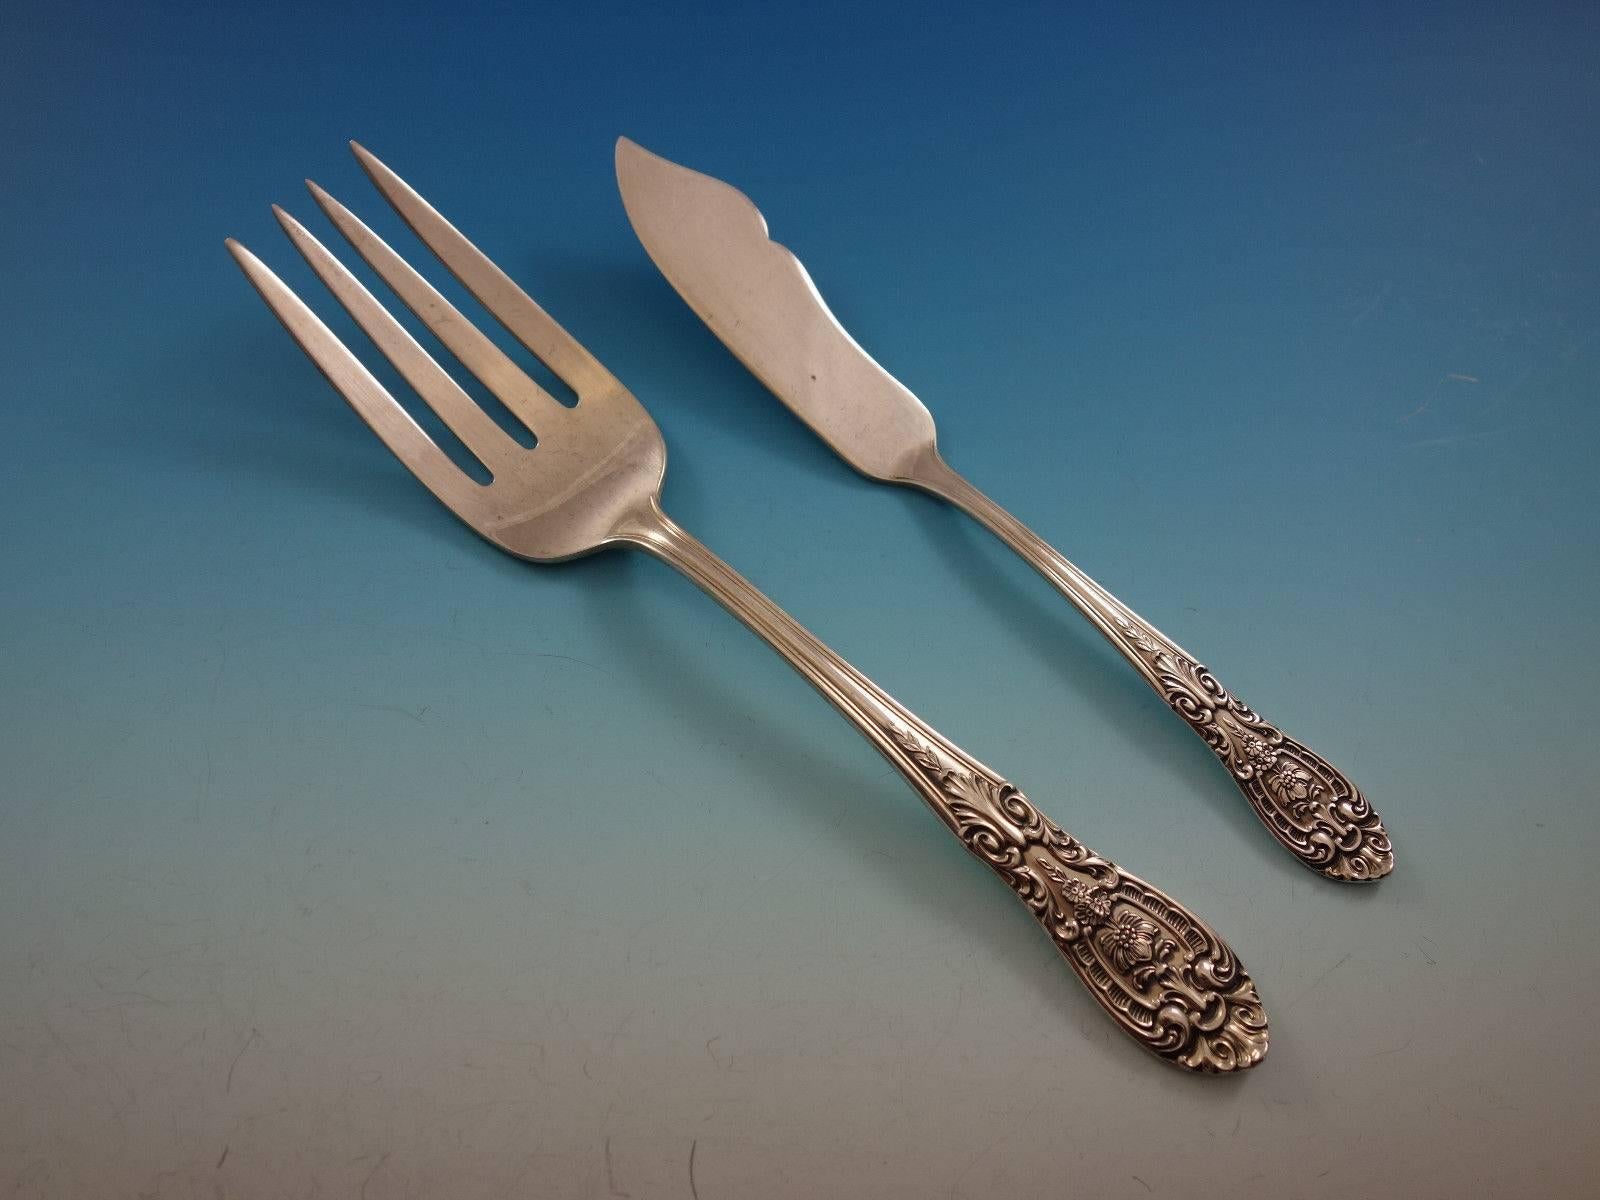 value of sterling silver flatware service for 12